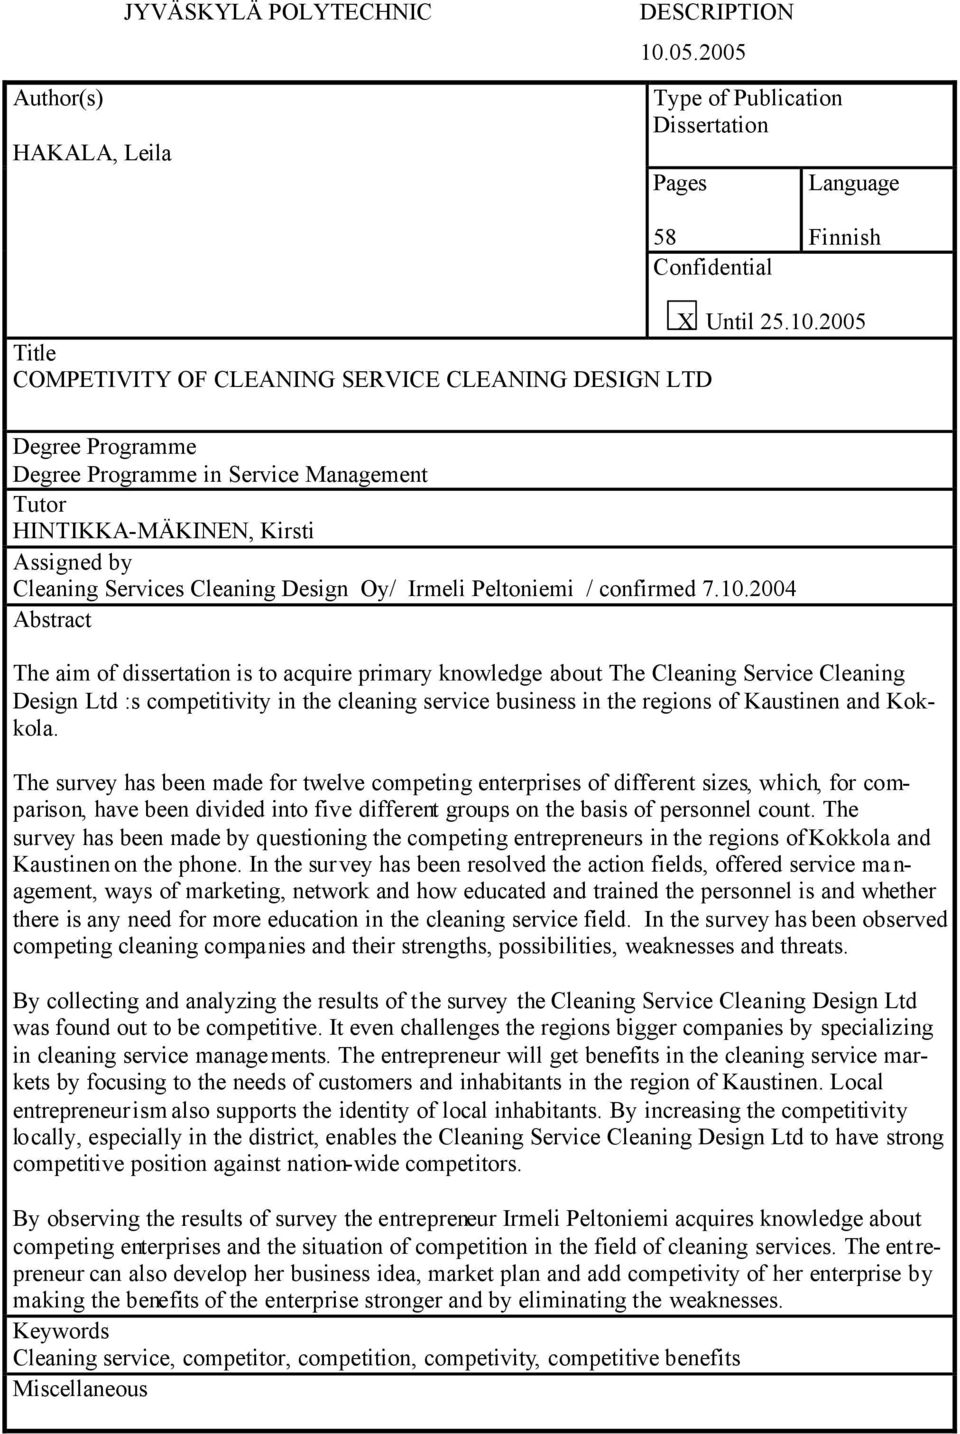 2005 Title COMPETIVITY OF CLEANING SERVICE CLEANING DESIGN LTD Degree Programme Degree Programme in Service Management Tutor HINTIKKA-MÄKINEN, Kirsti Assigned by Cleaning Services Cleaning Design Oy/